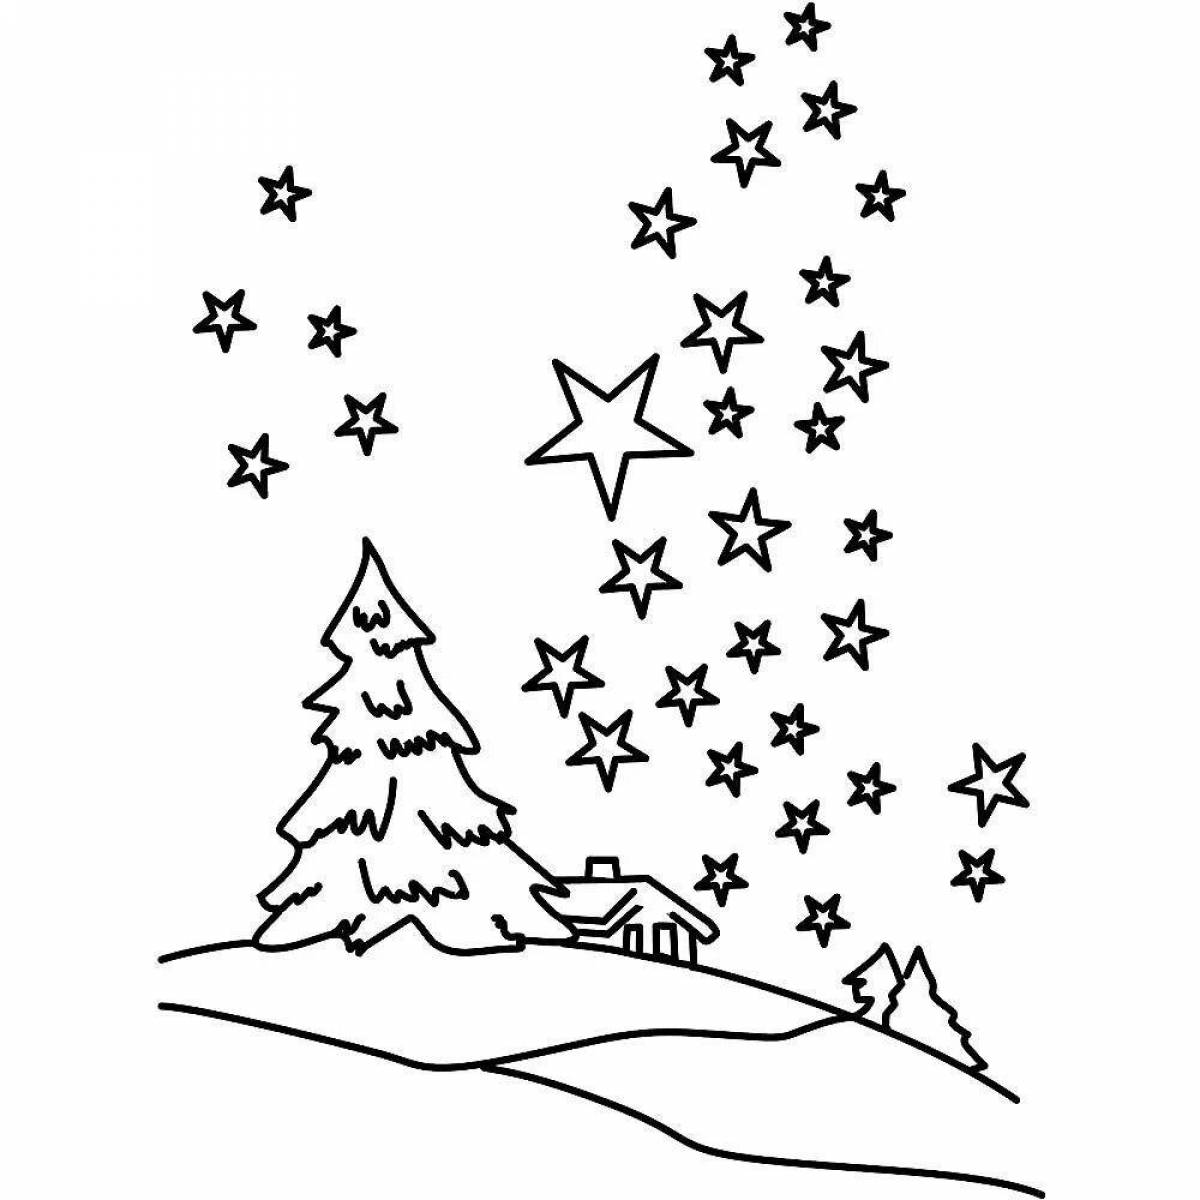 Serene night coloring pages for kids